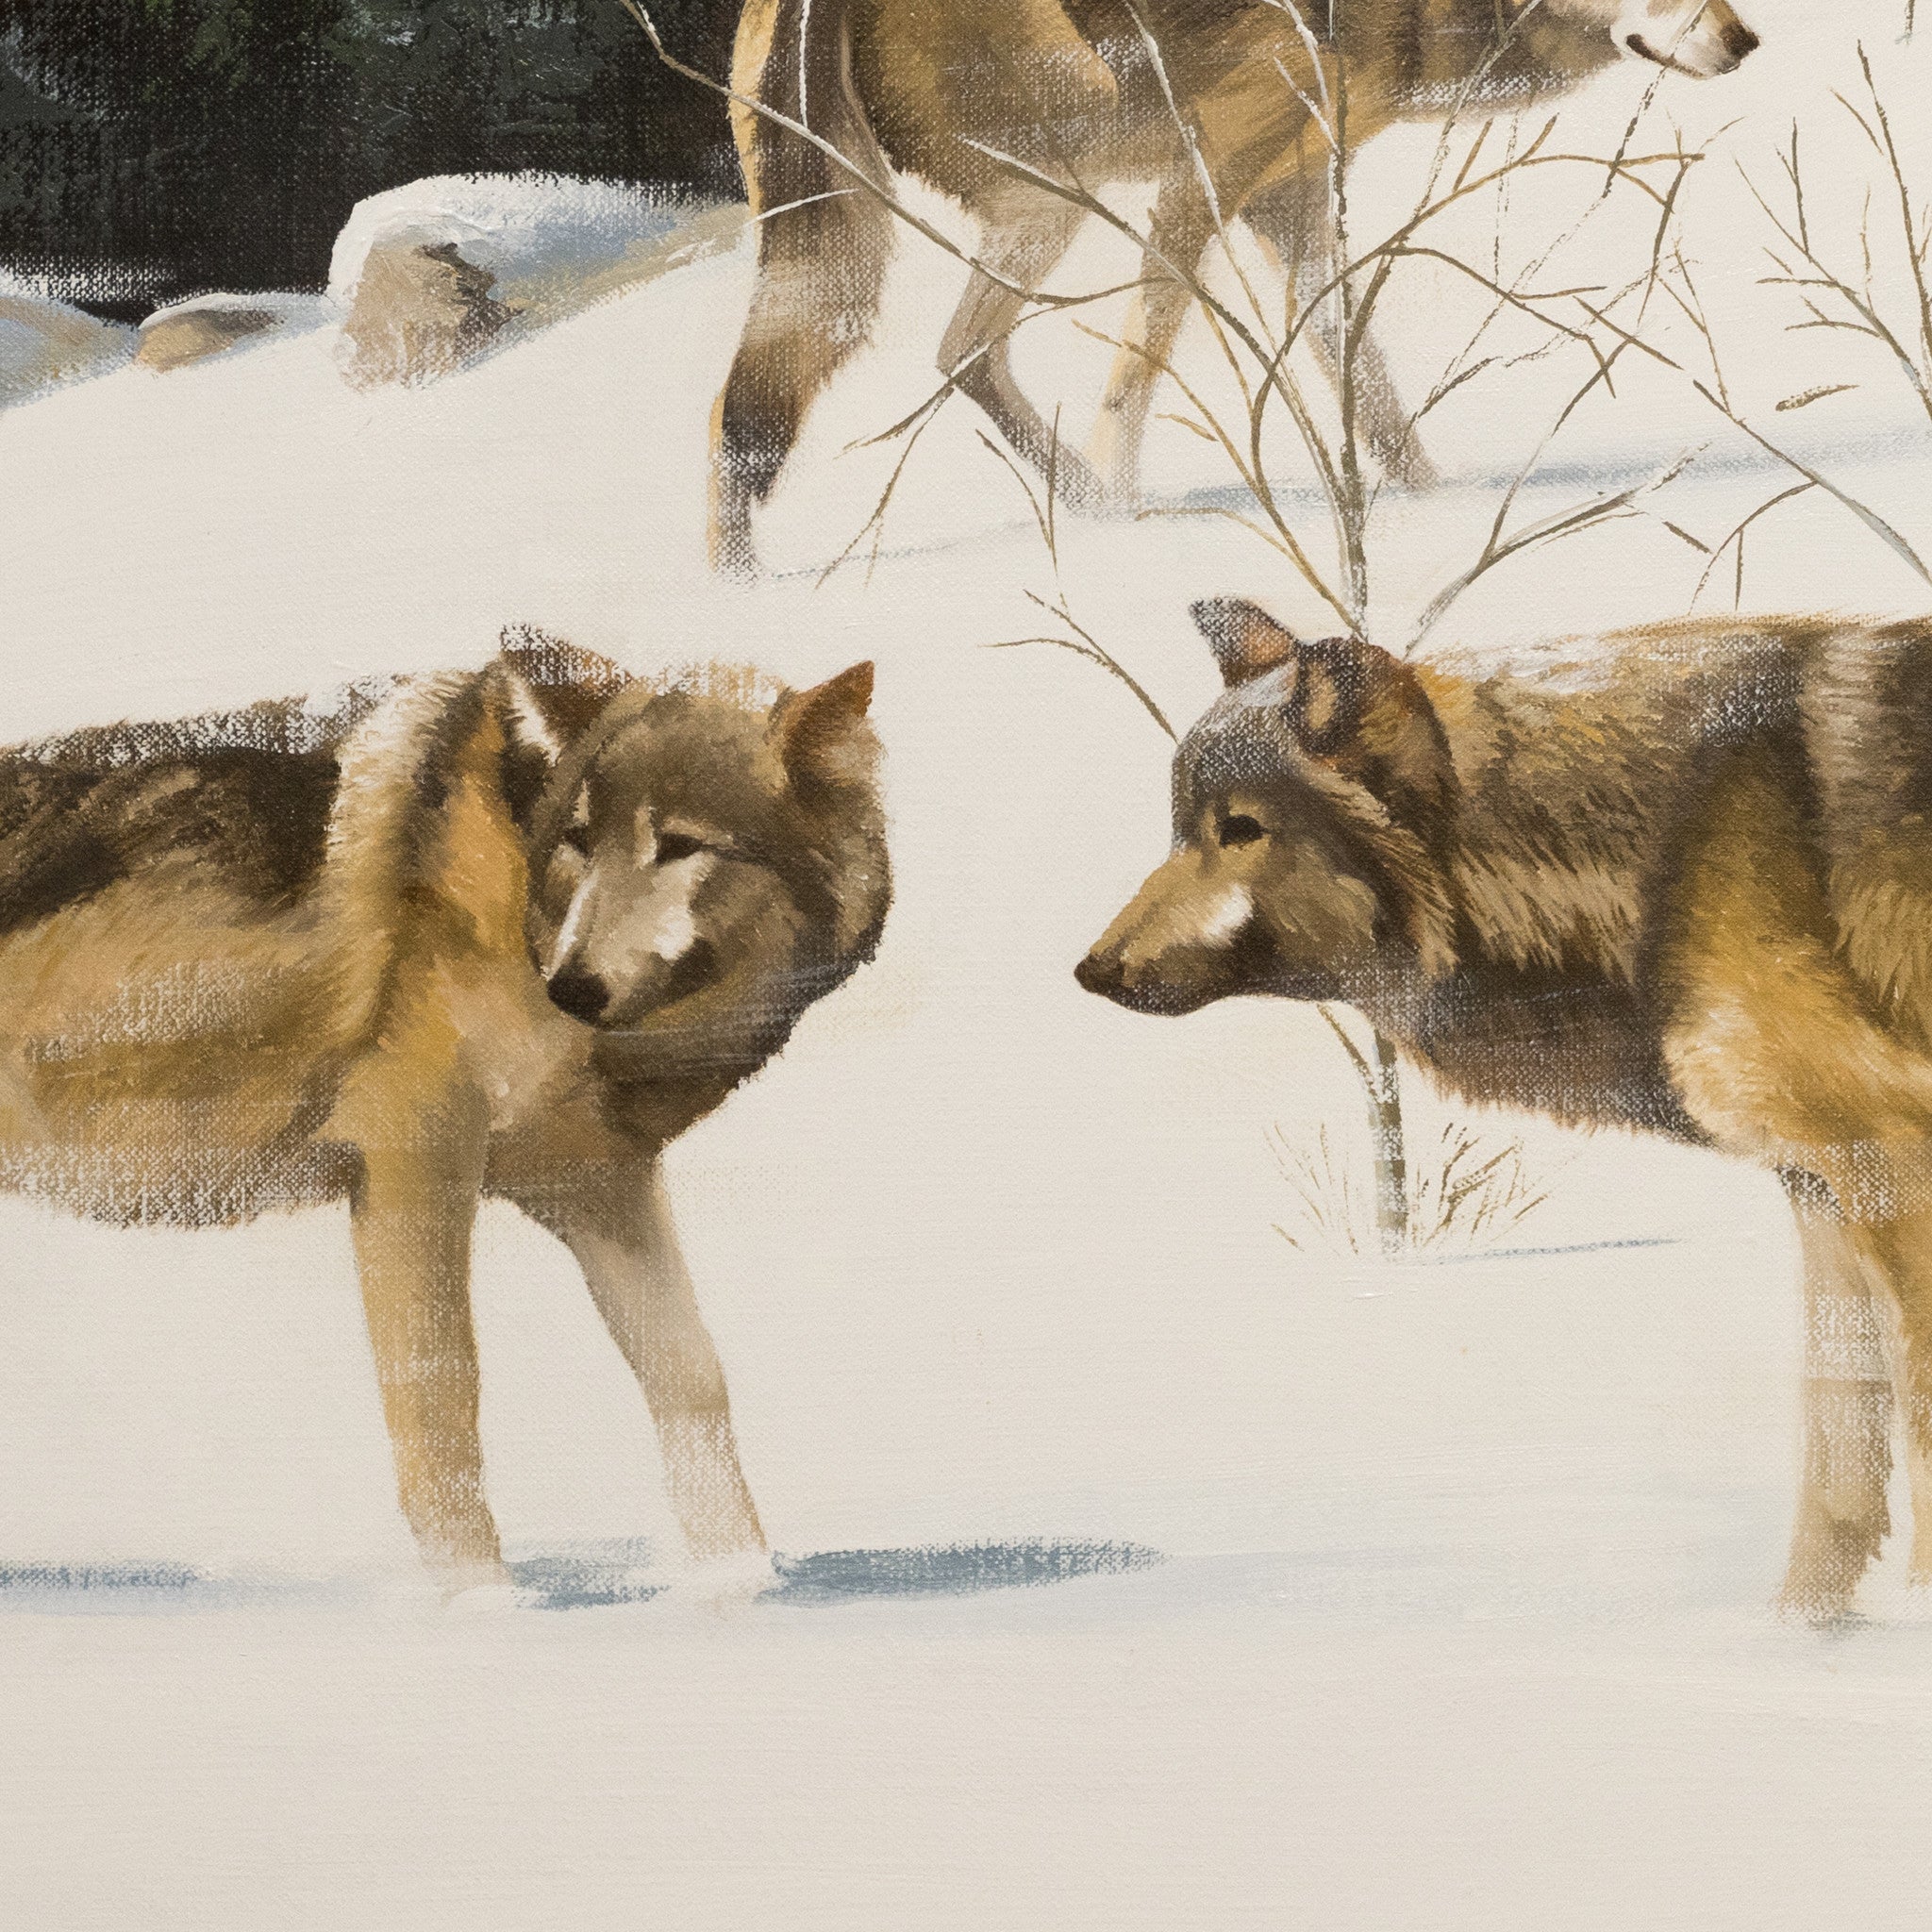 Pack of Wolves in the Snow by Peter Darro